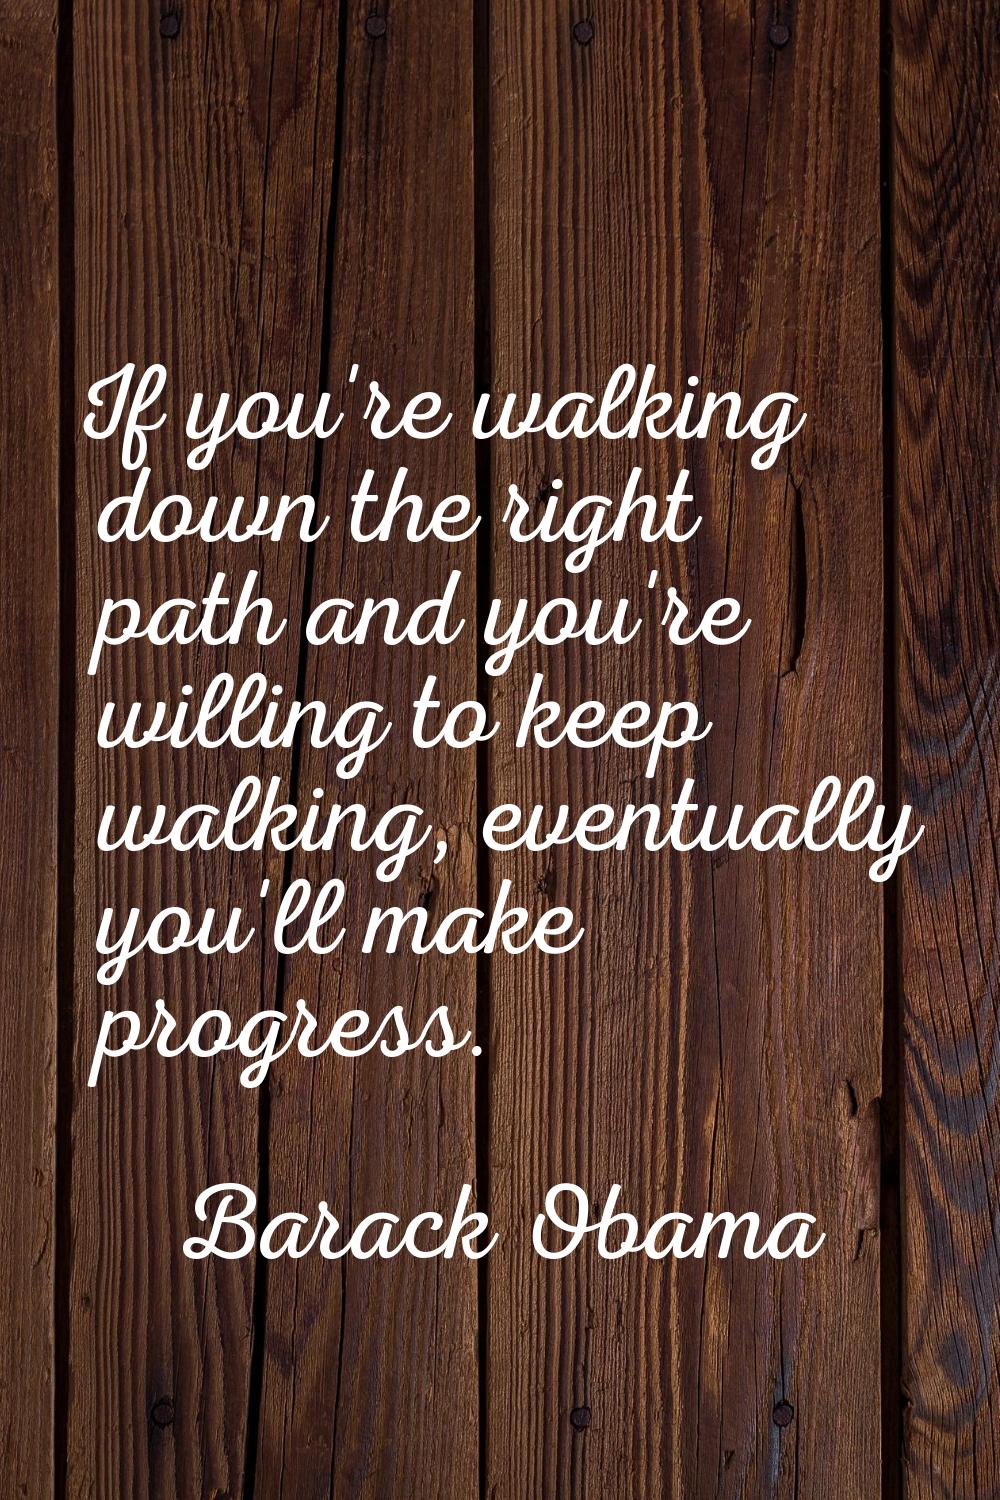 If you're walking down the right path and you're willing to keep walking, eventually you'll make pr